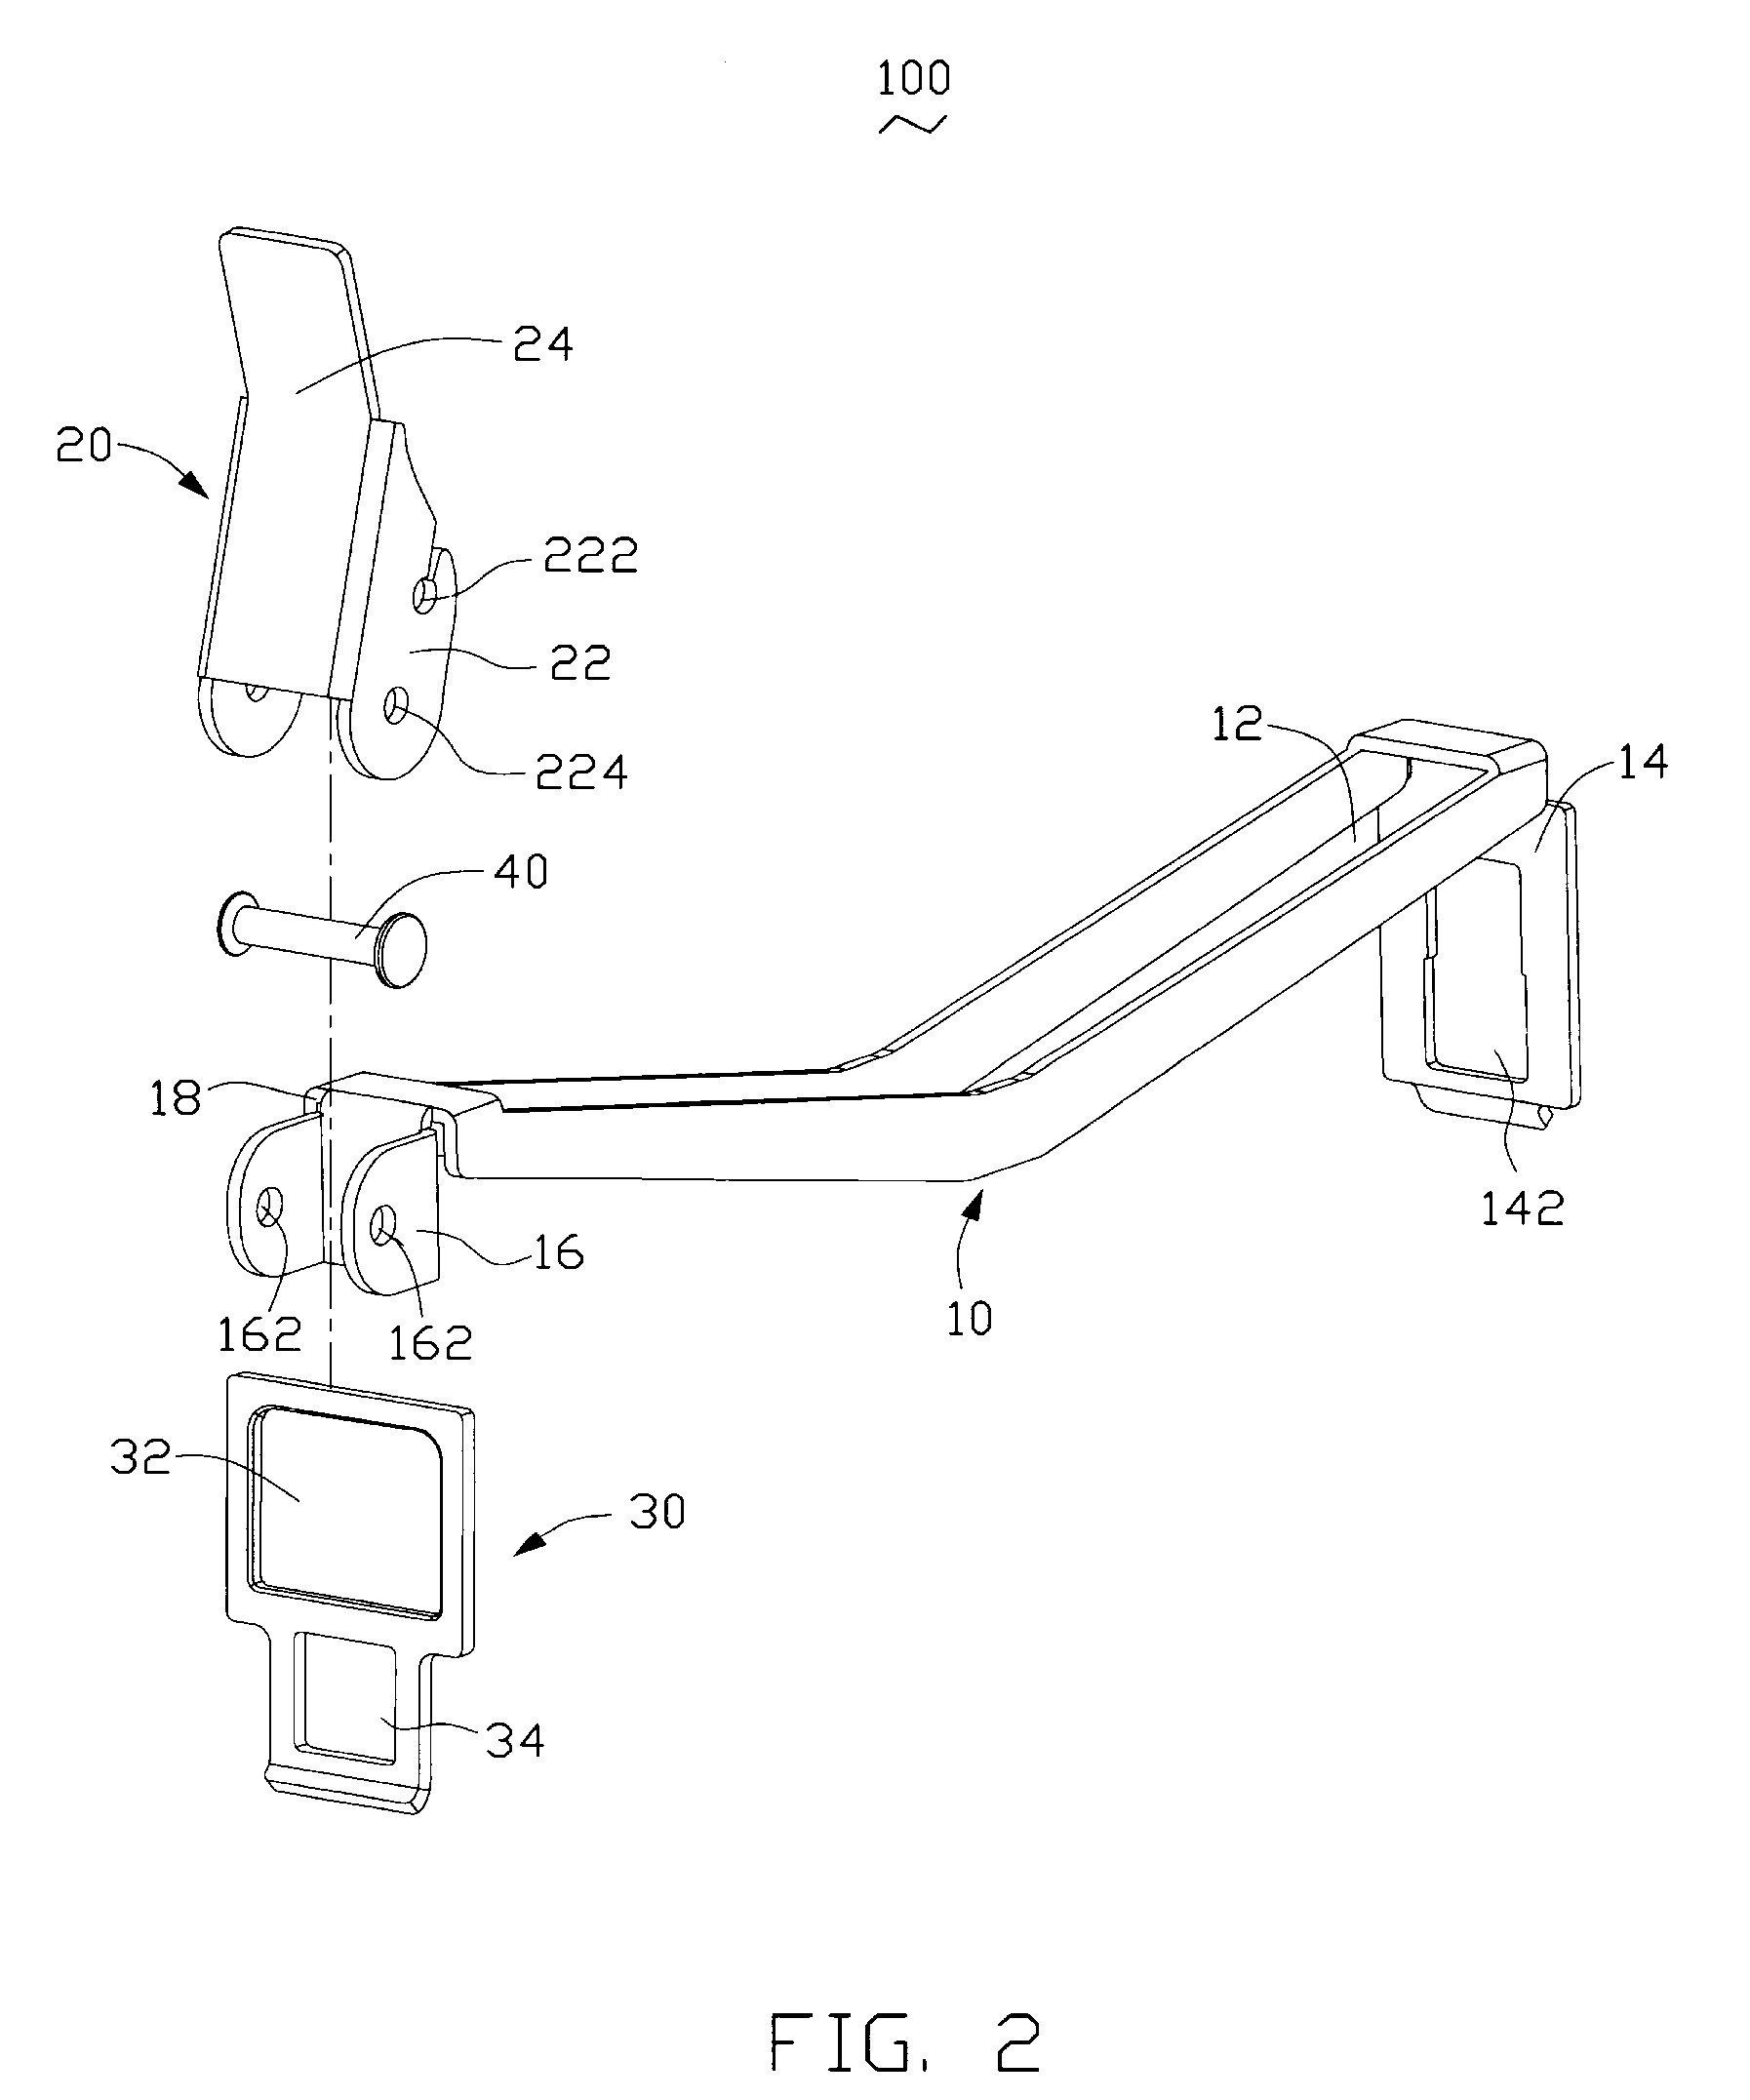 Heat sink clip and assembly